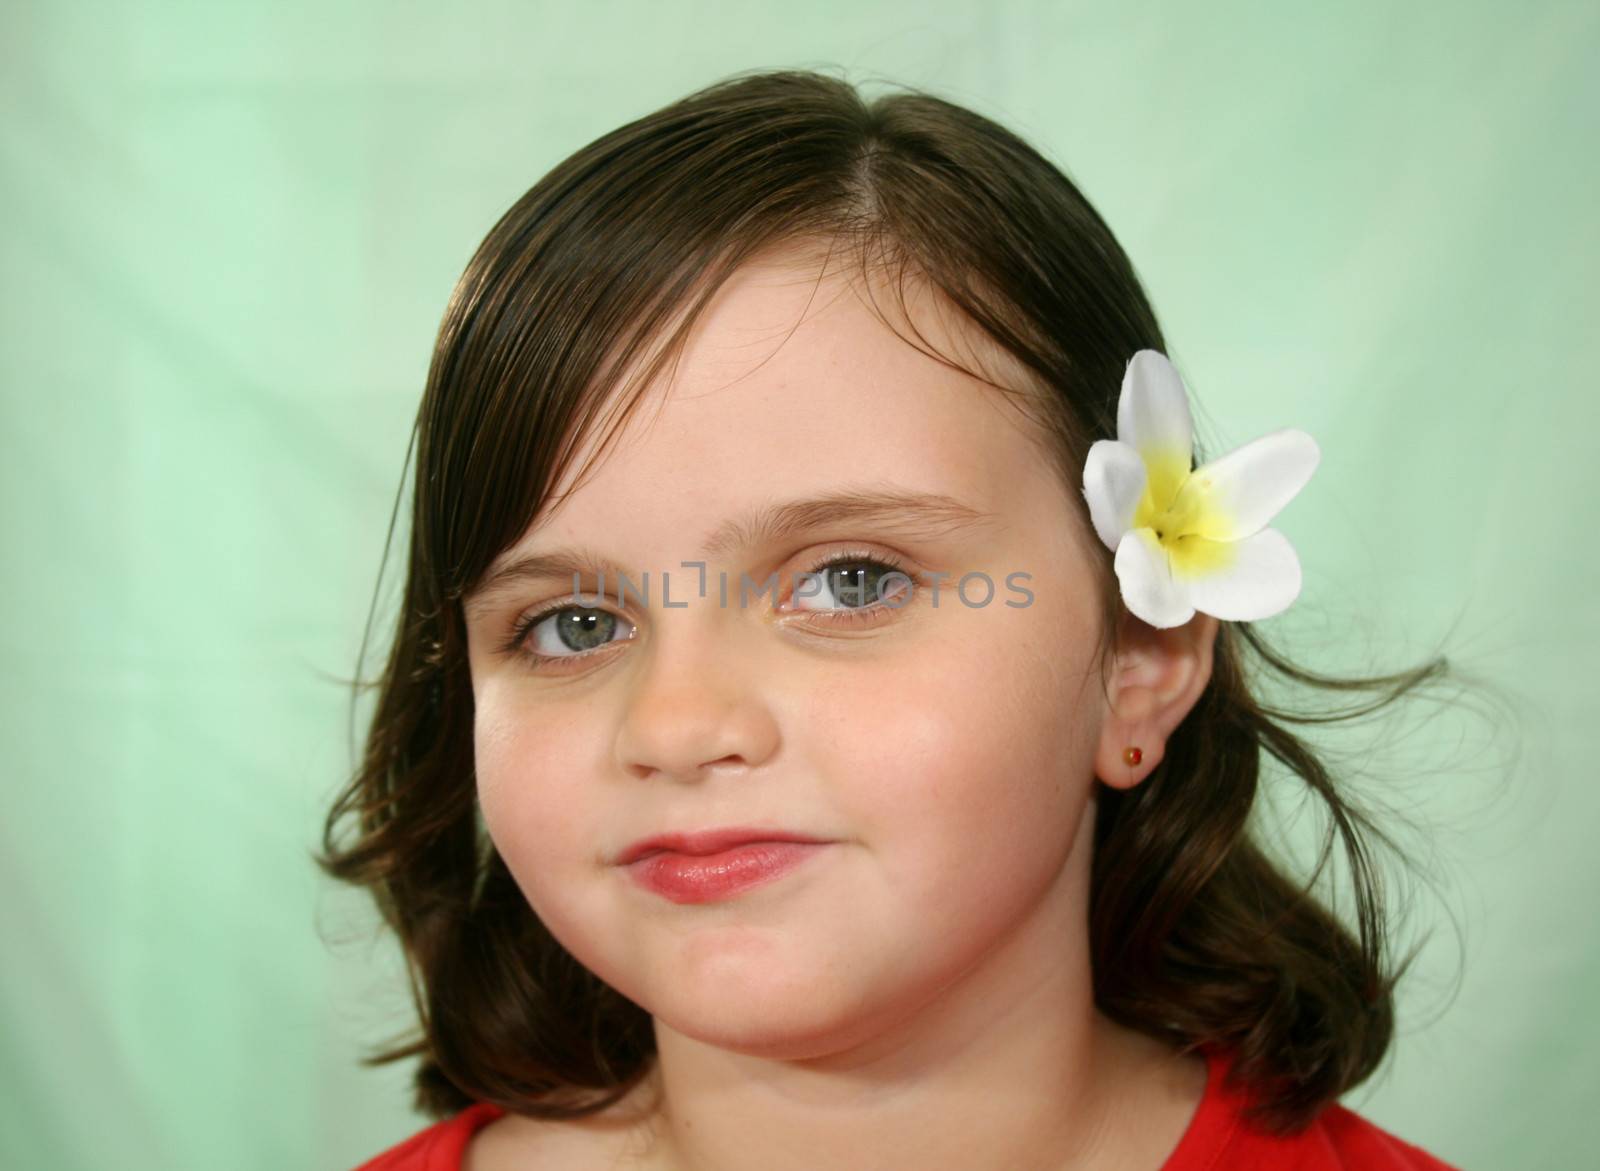 Little girl with frangipani flower in her hair looking at camera.